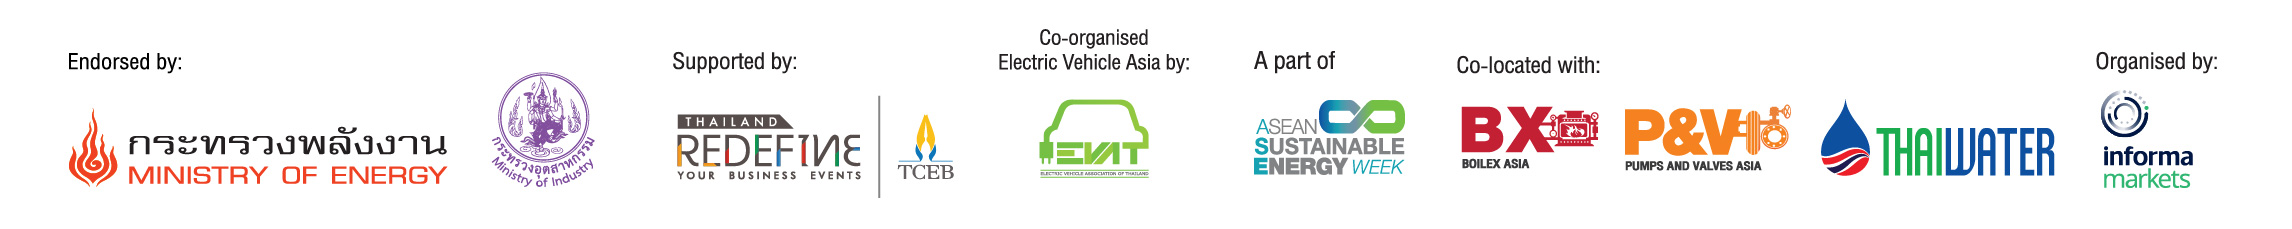 Electric Vehicle Asia 2022 E-Newsletter Footer